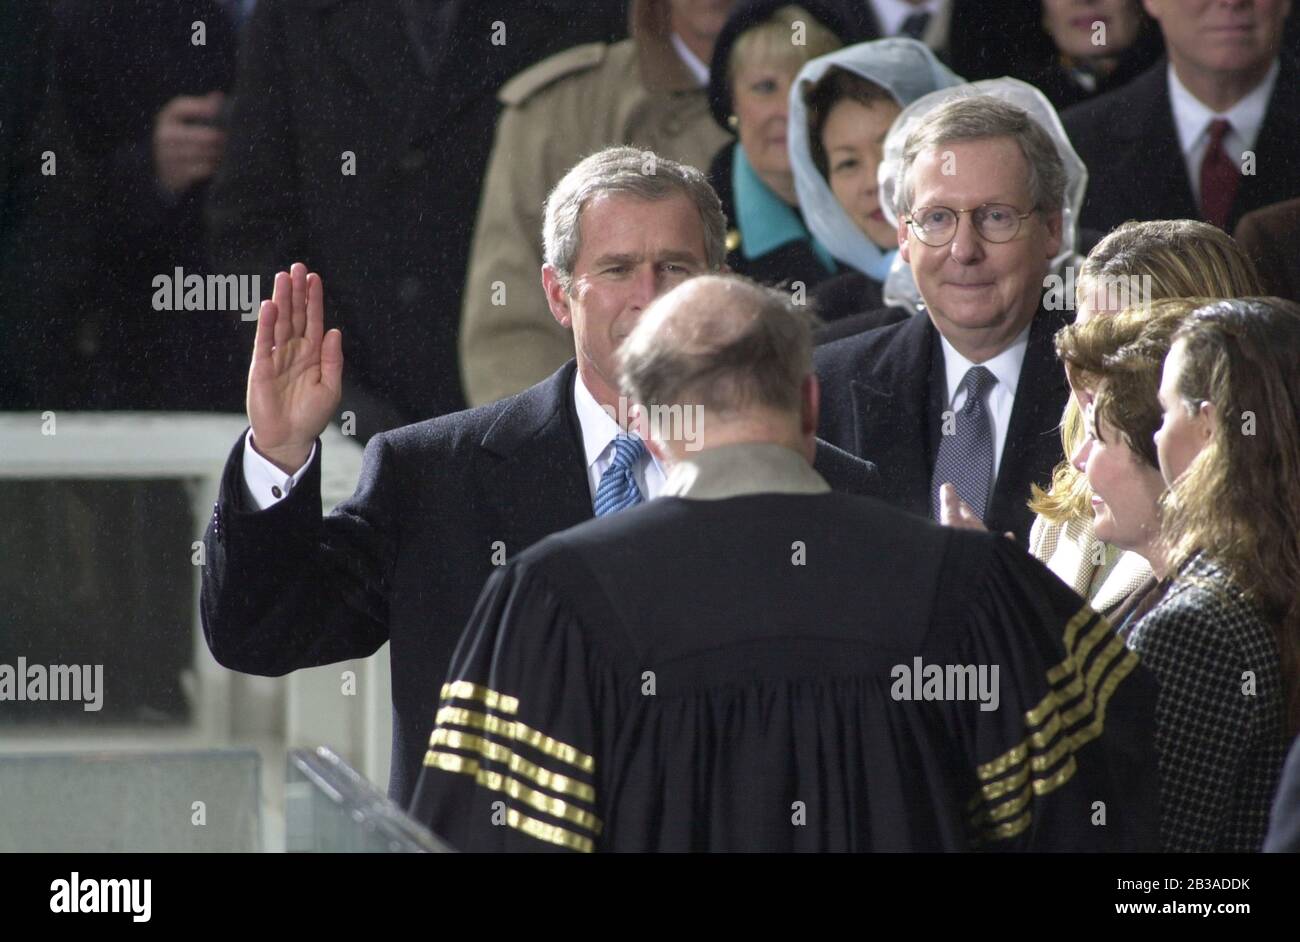 Washington, D.C. USA, Jan. 20 2001:  Pres. George W. Bush takes the oath of office as the 43rd President of the United States during inaugural ceremony. ©Bob Daemmrich Stock Photo